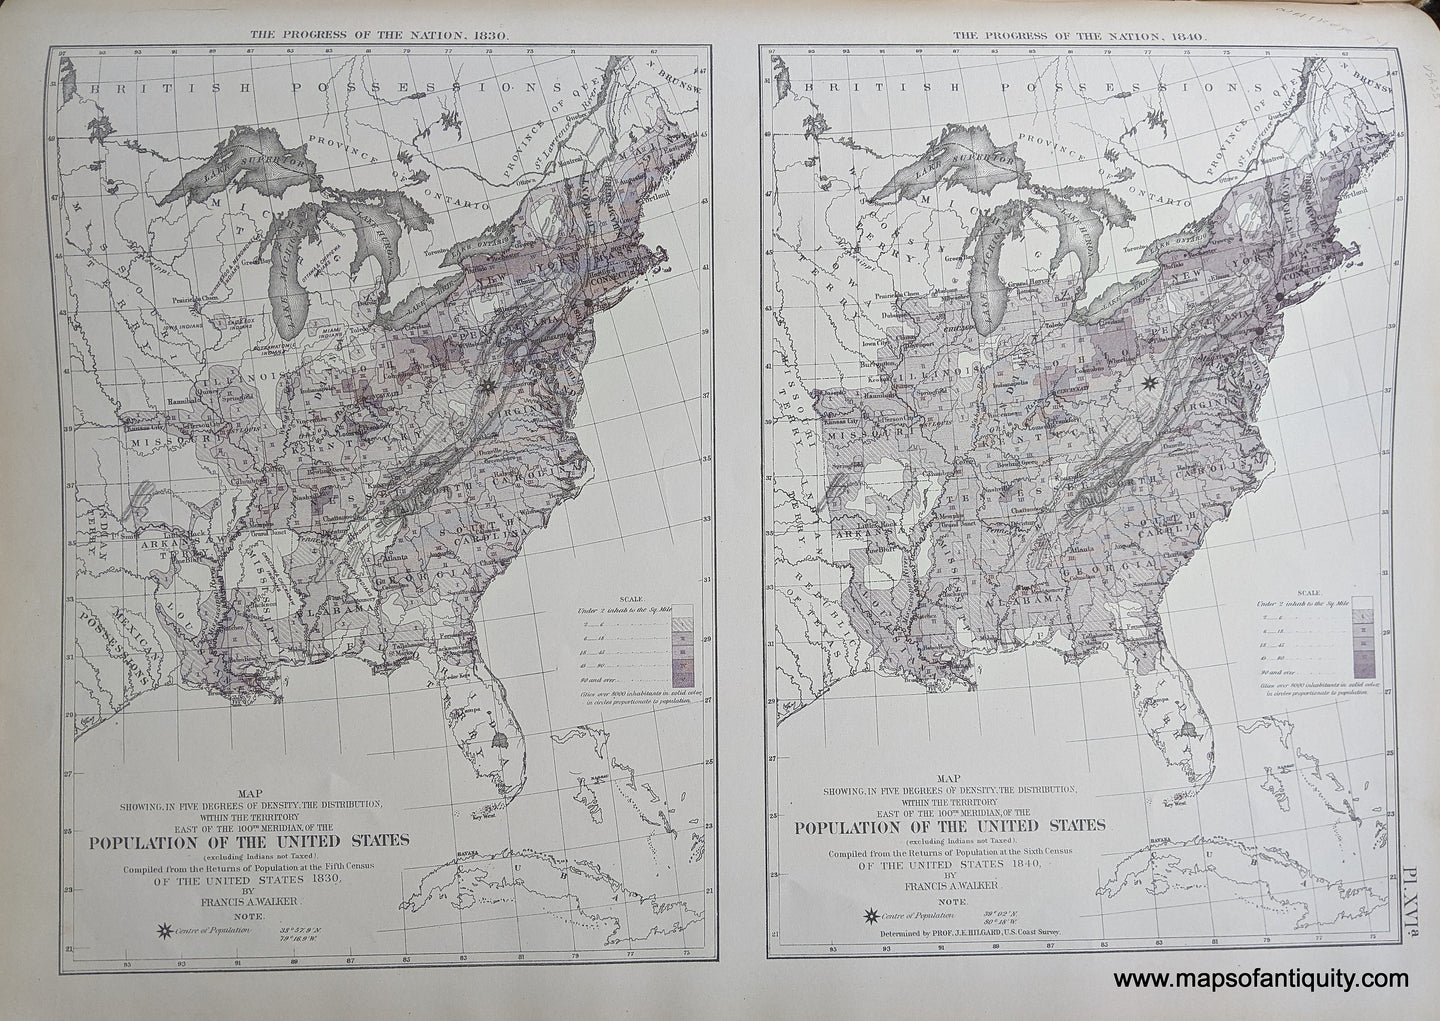 Genuine-Antique-Map-The-Progress-of-the-Nation-1830-&-1840-United-States--1874-Walker-/-Bien-Maps-Of-Antiquity-1800s-19th-century